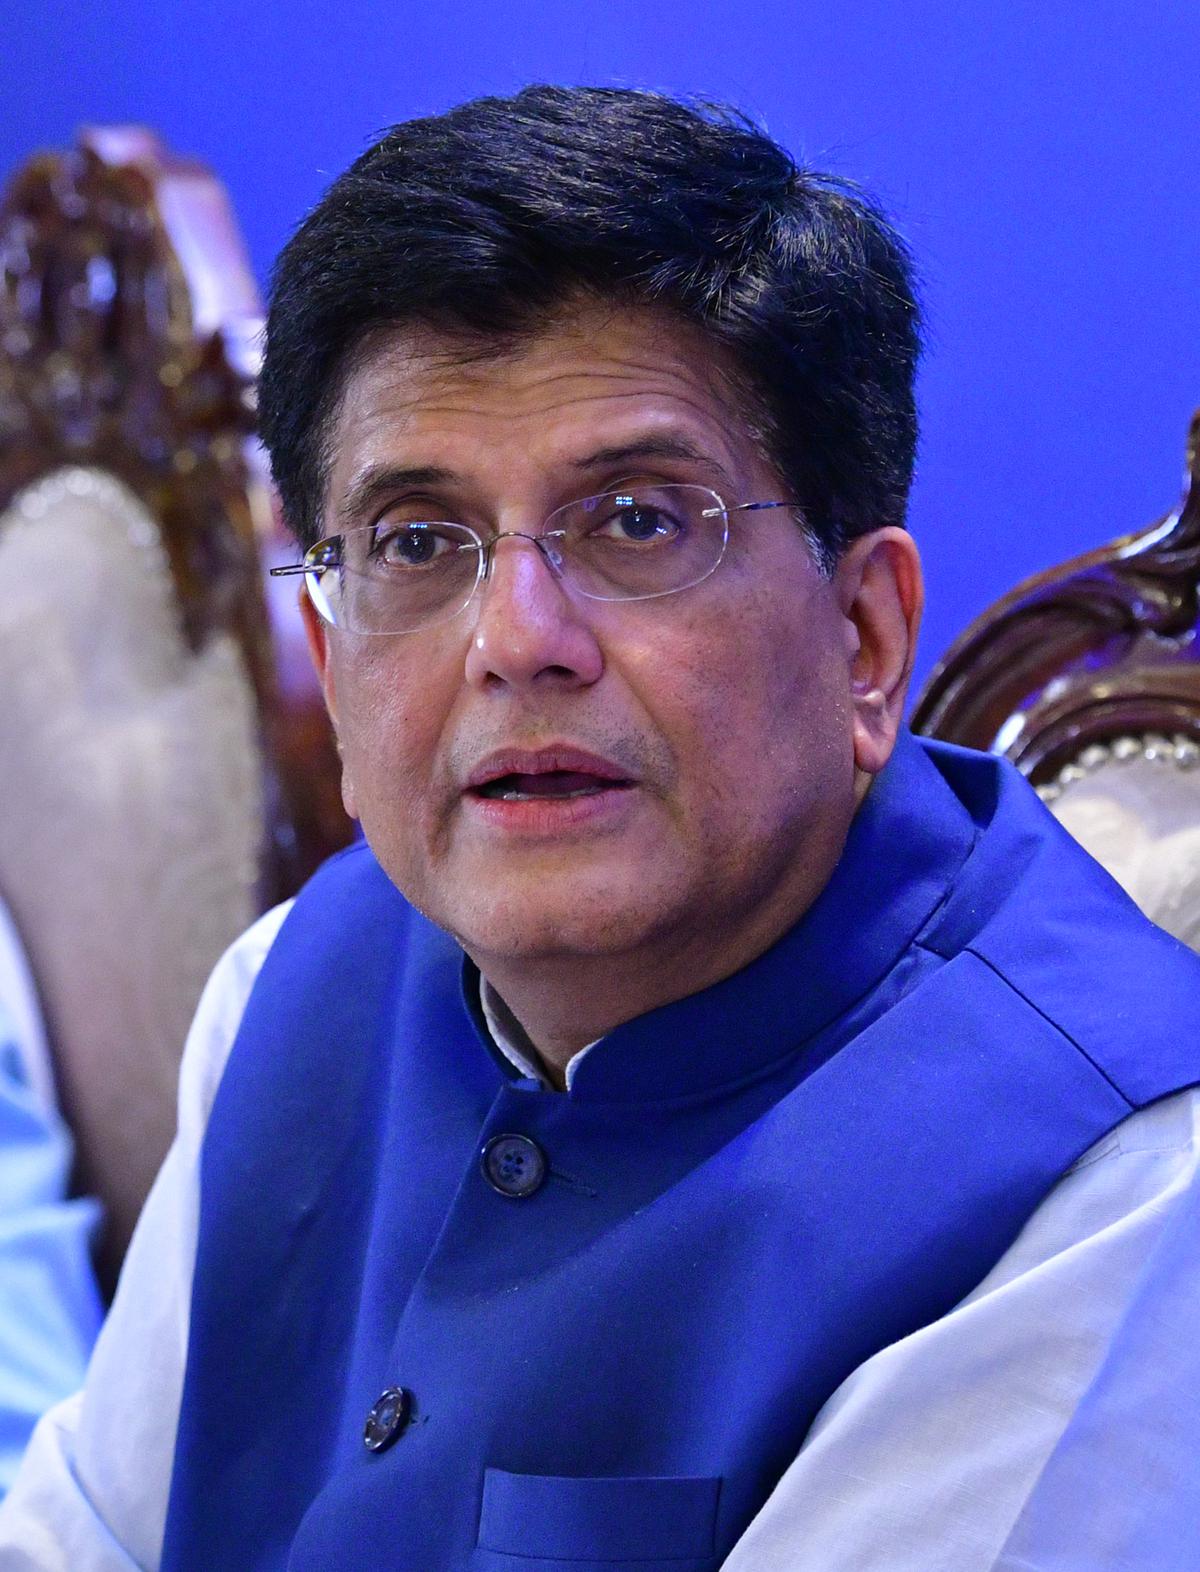 PAN could become single ID for investment approvals: Piyush Goyal